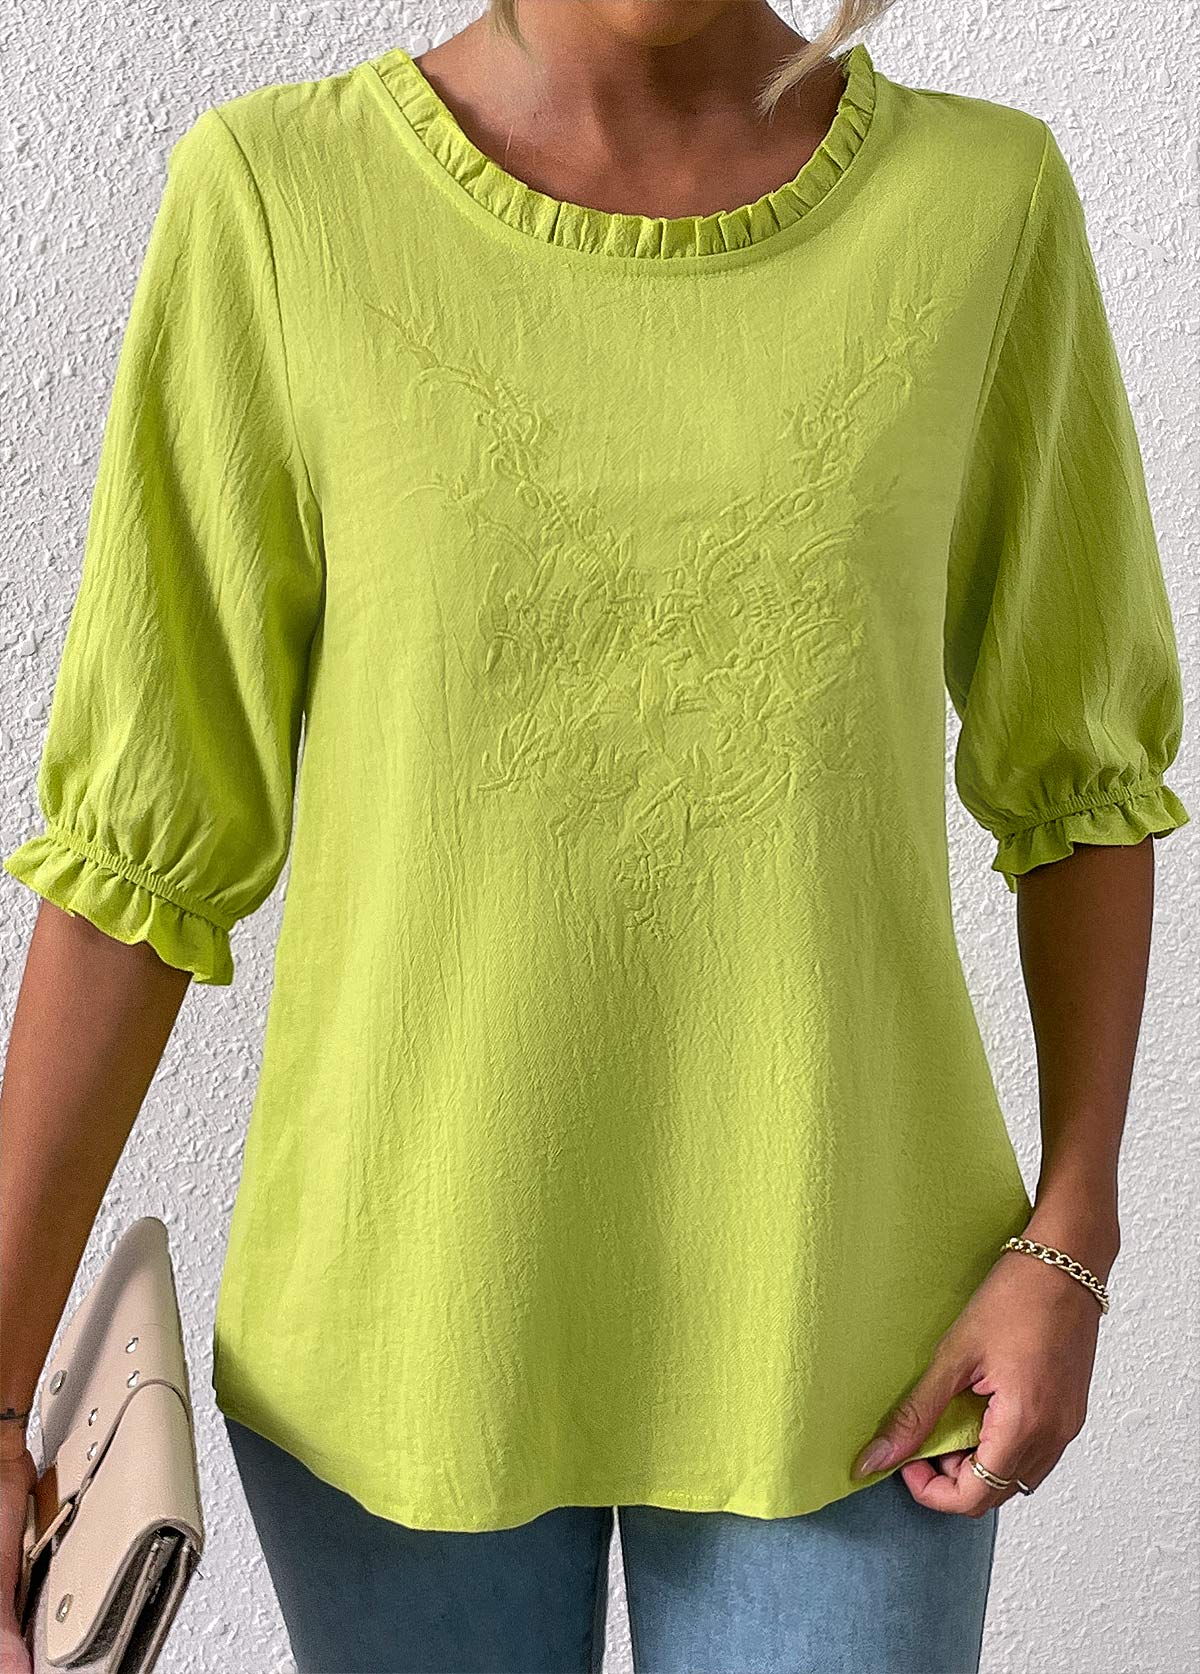 Grass Green Embroidery Three Quarter Length Sleeve Blouse